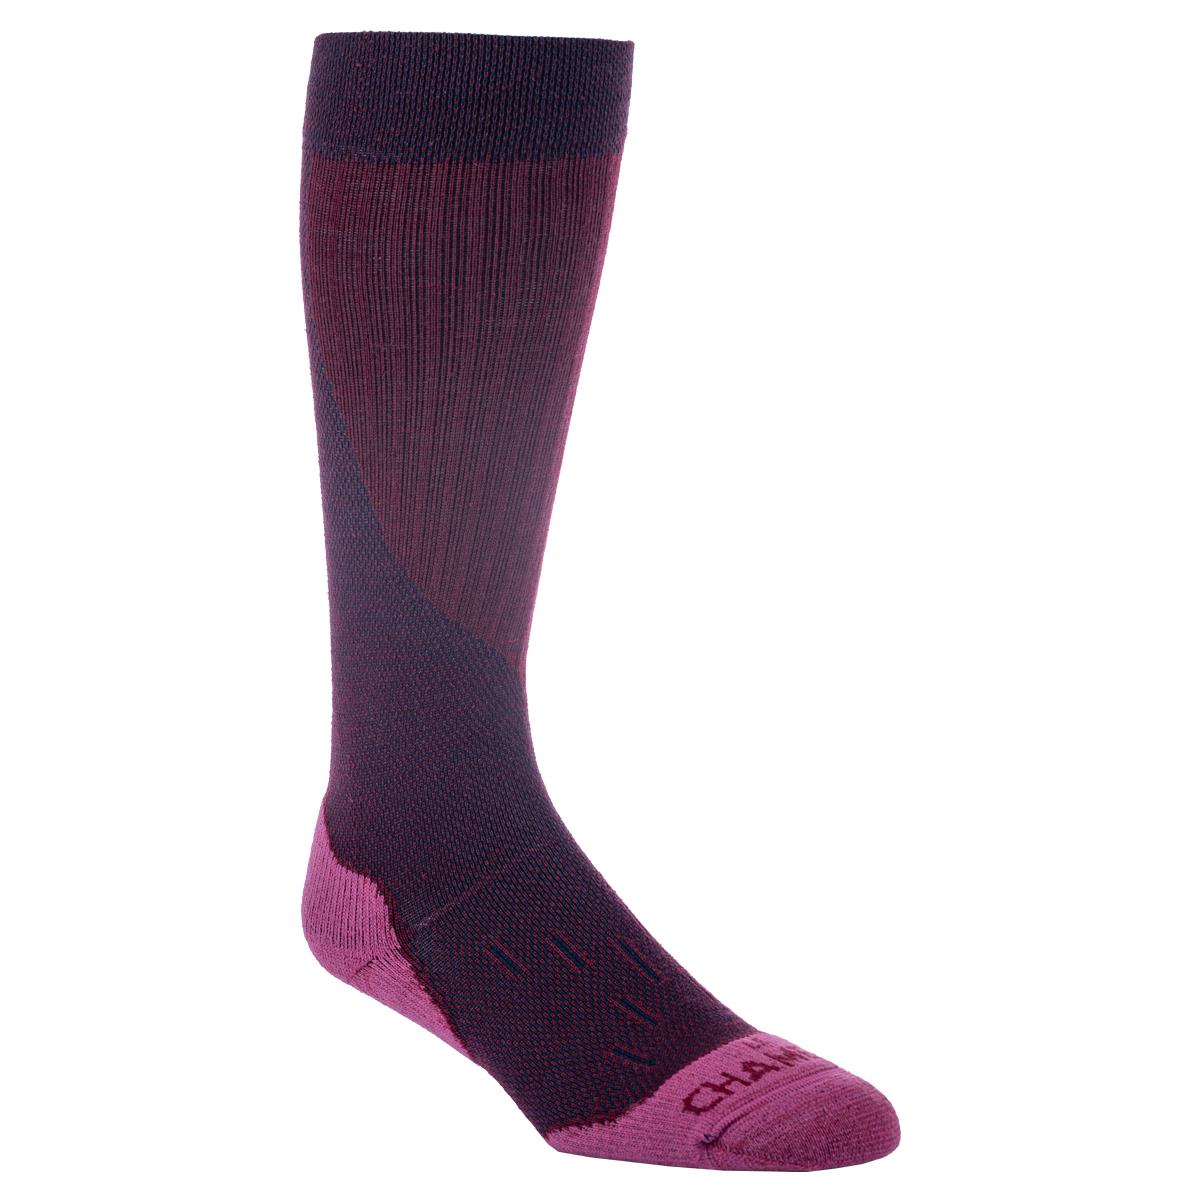 What is the material composition of Le Chameau Womens Iris Socks?